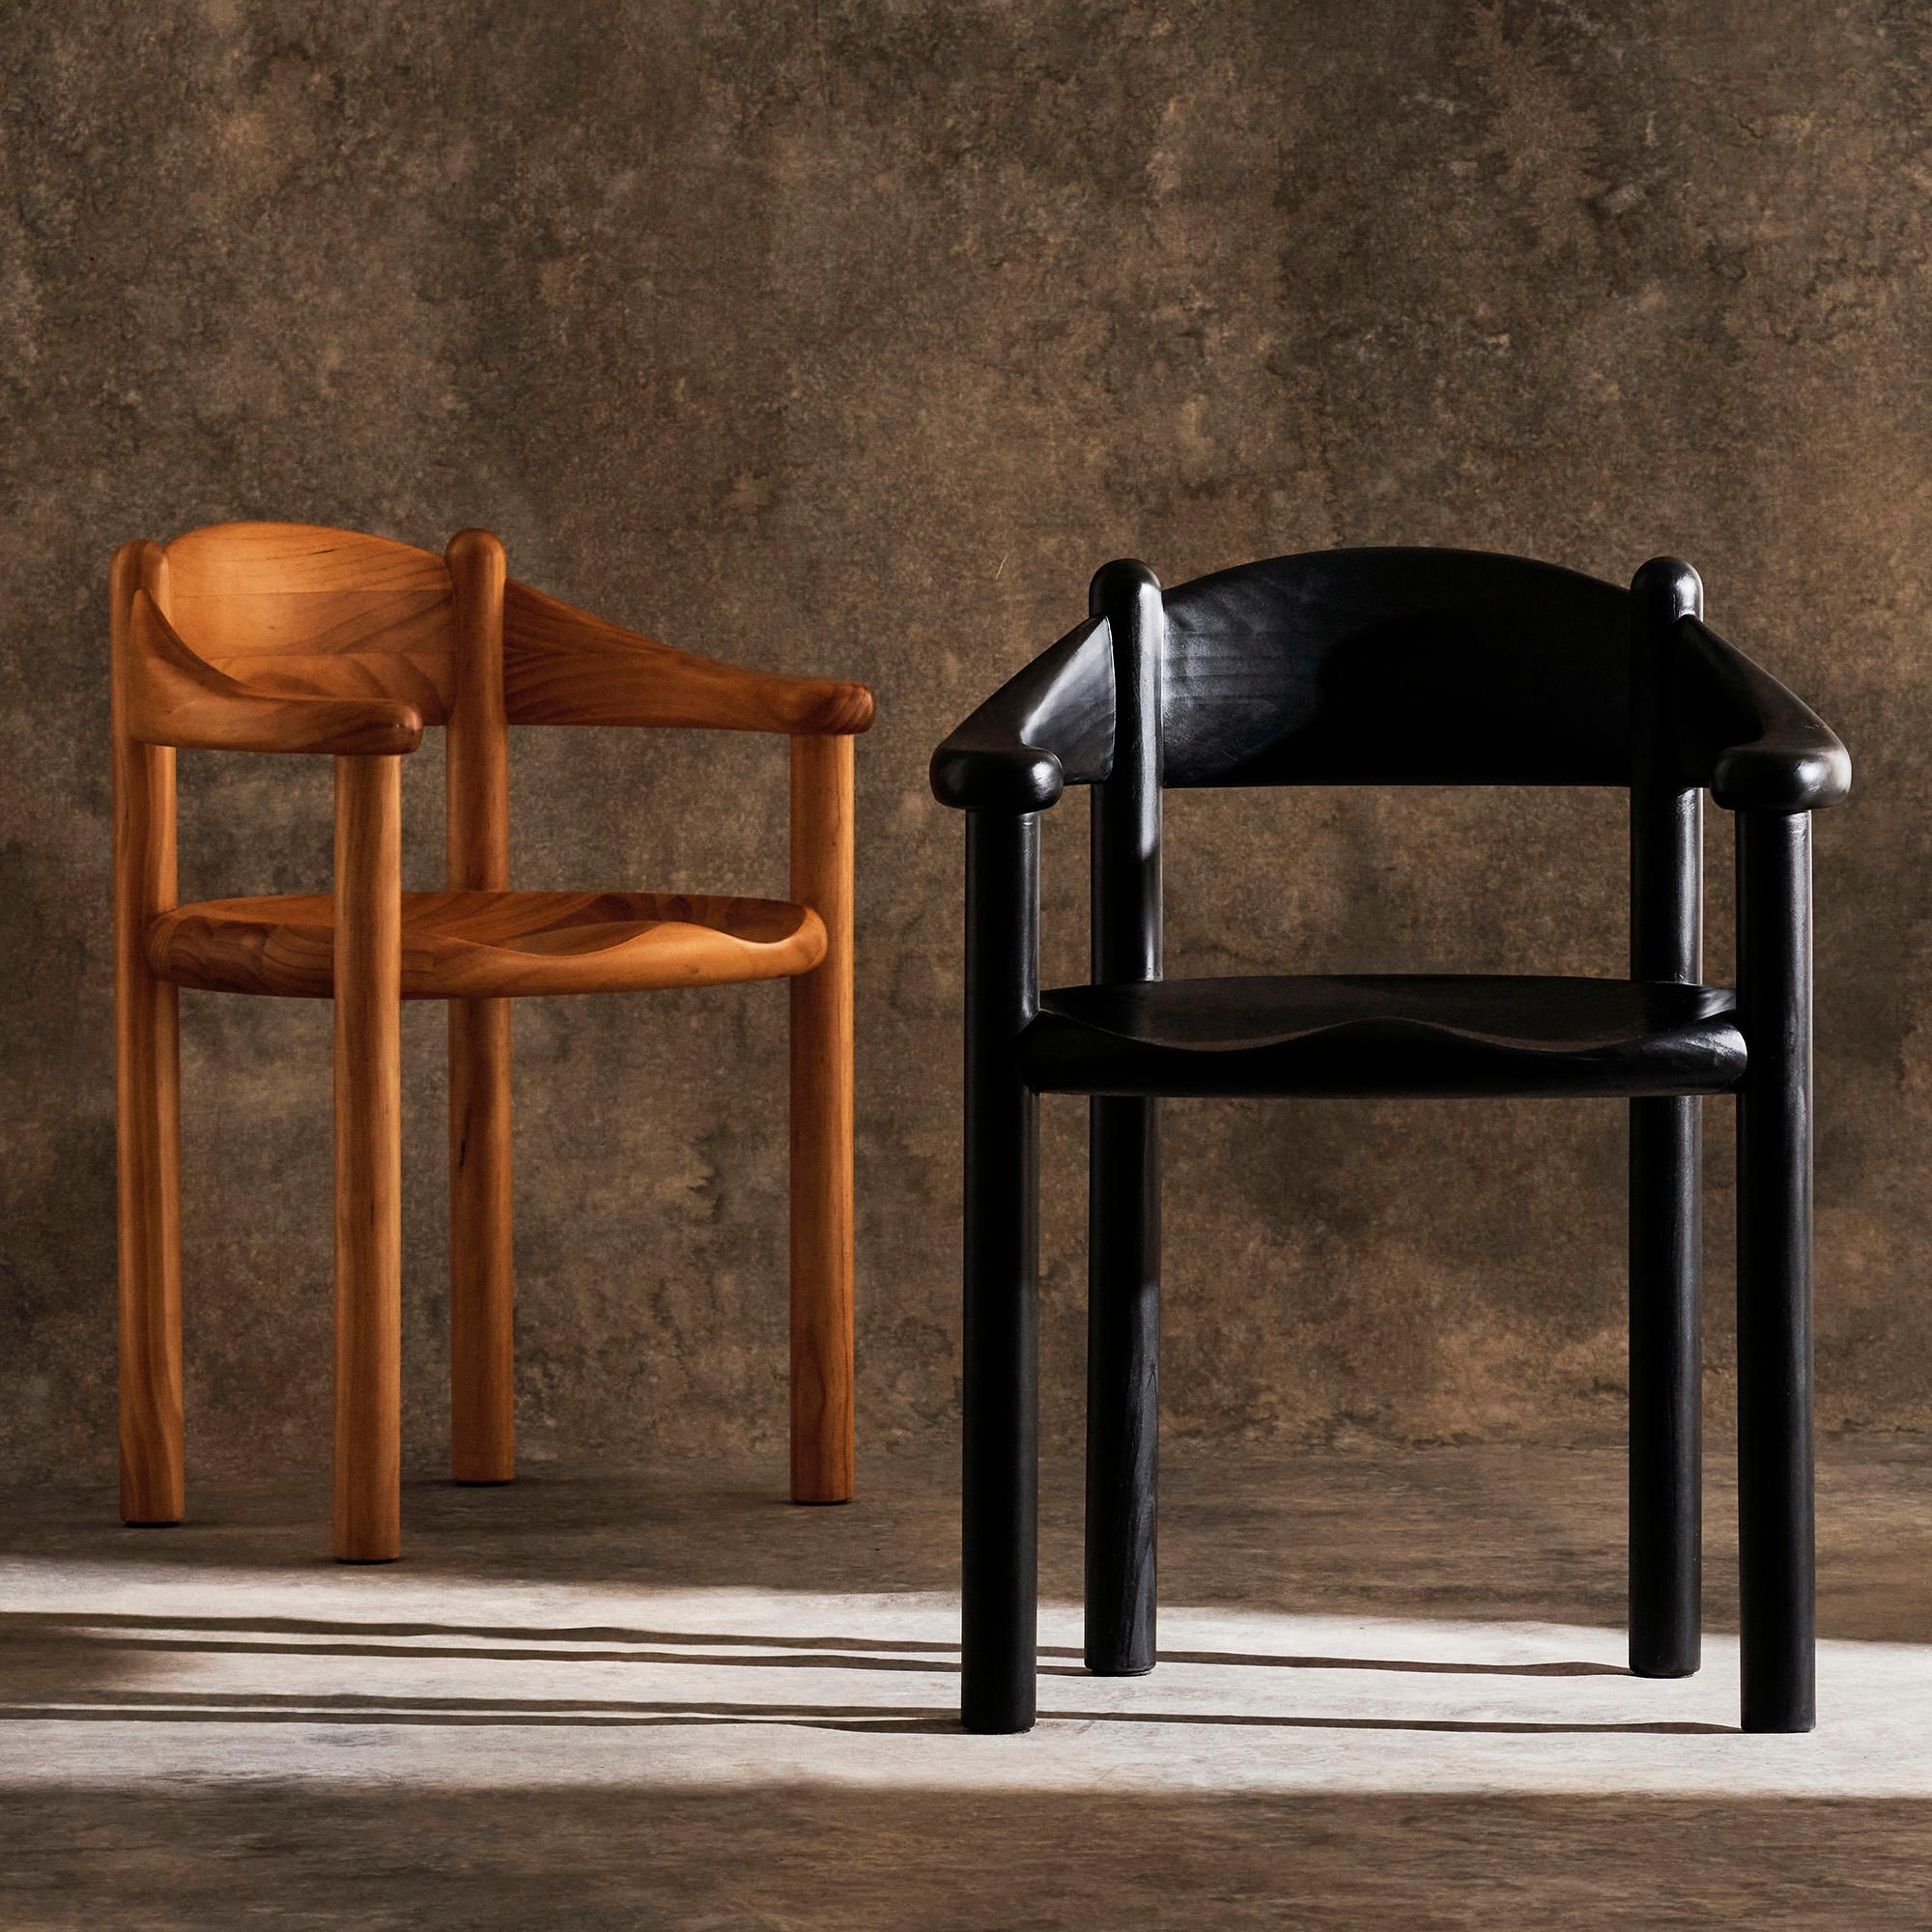 Daumiller Armchair for GUBI in Brown/Black Pine.

Solid in construction, simple in form, and sculptural in expression, the Daumiller Armchair reflects designer Rainer Daumiller’s lifelong affinity for natural materials and shapes. Executed in